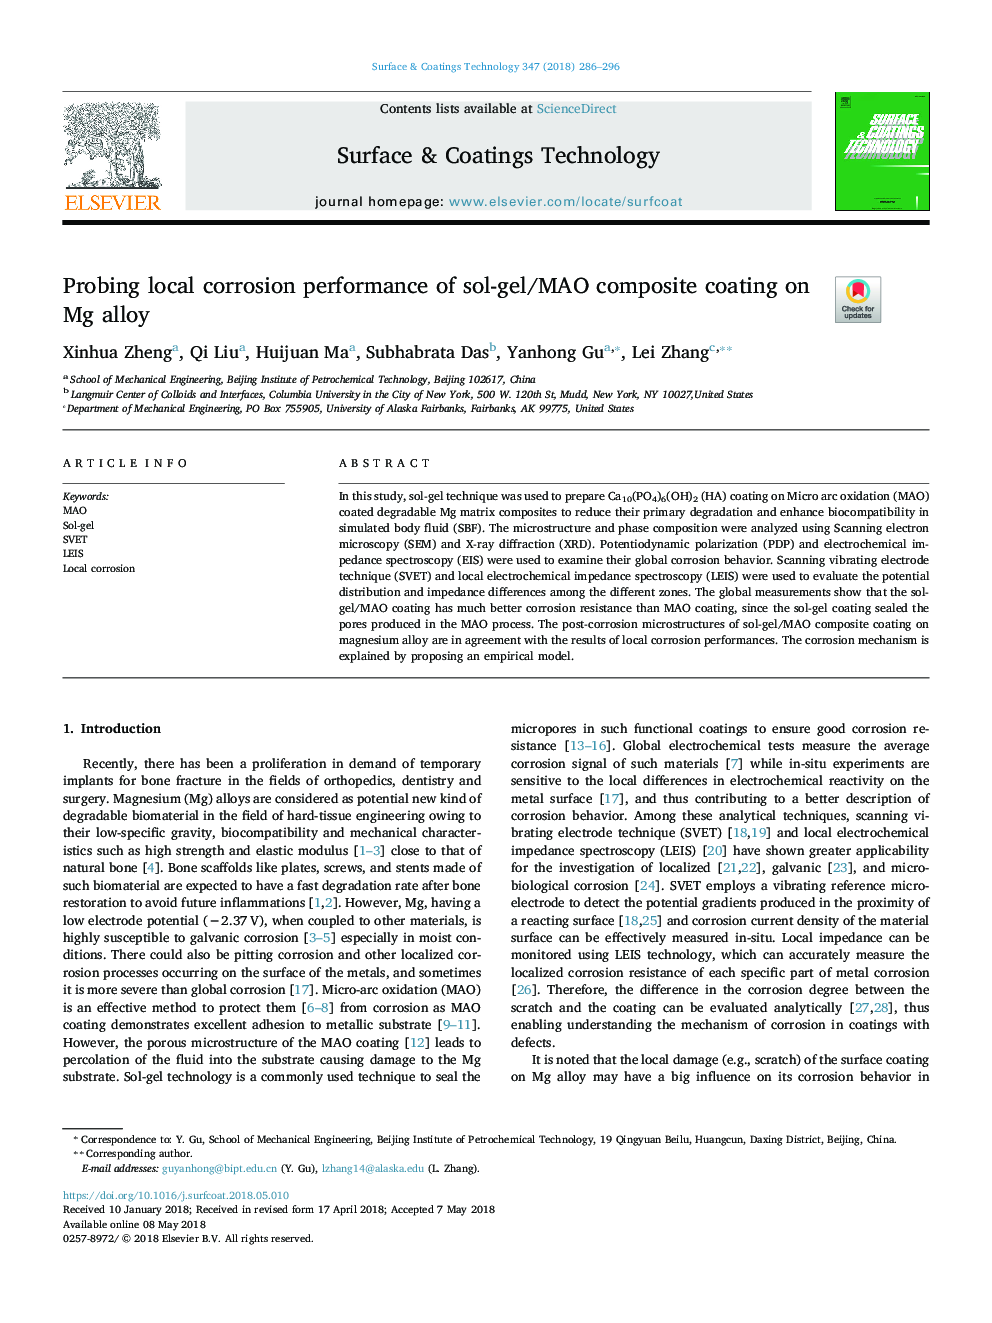 Probing local corrosion performance of sol-gel/MAO composite coating on Mg alloy